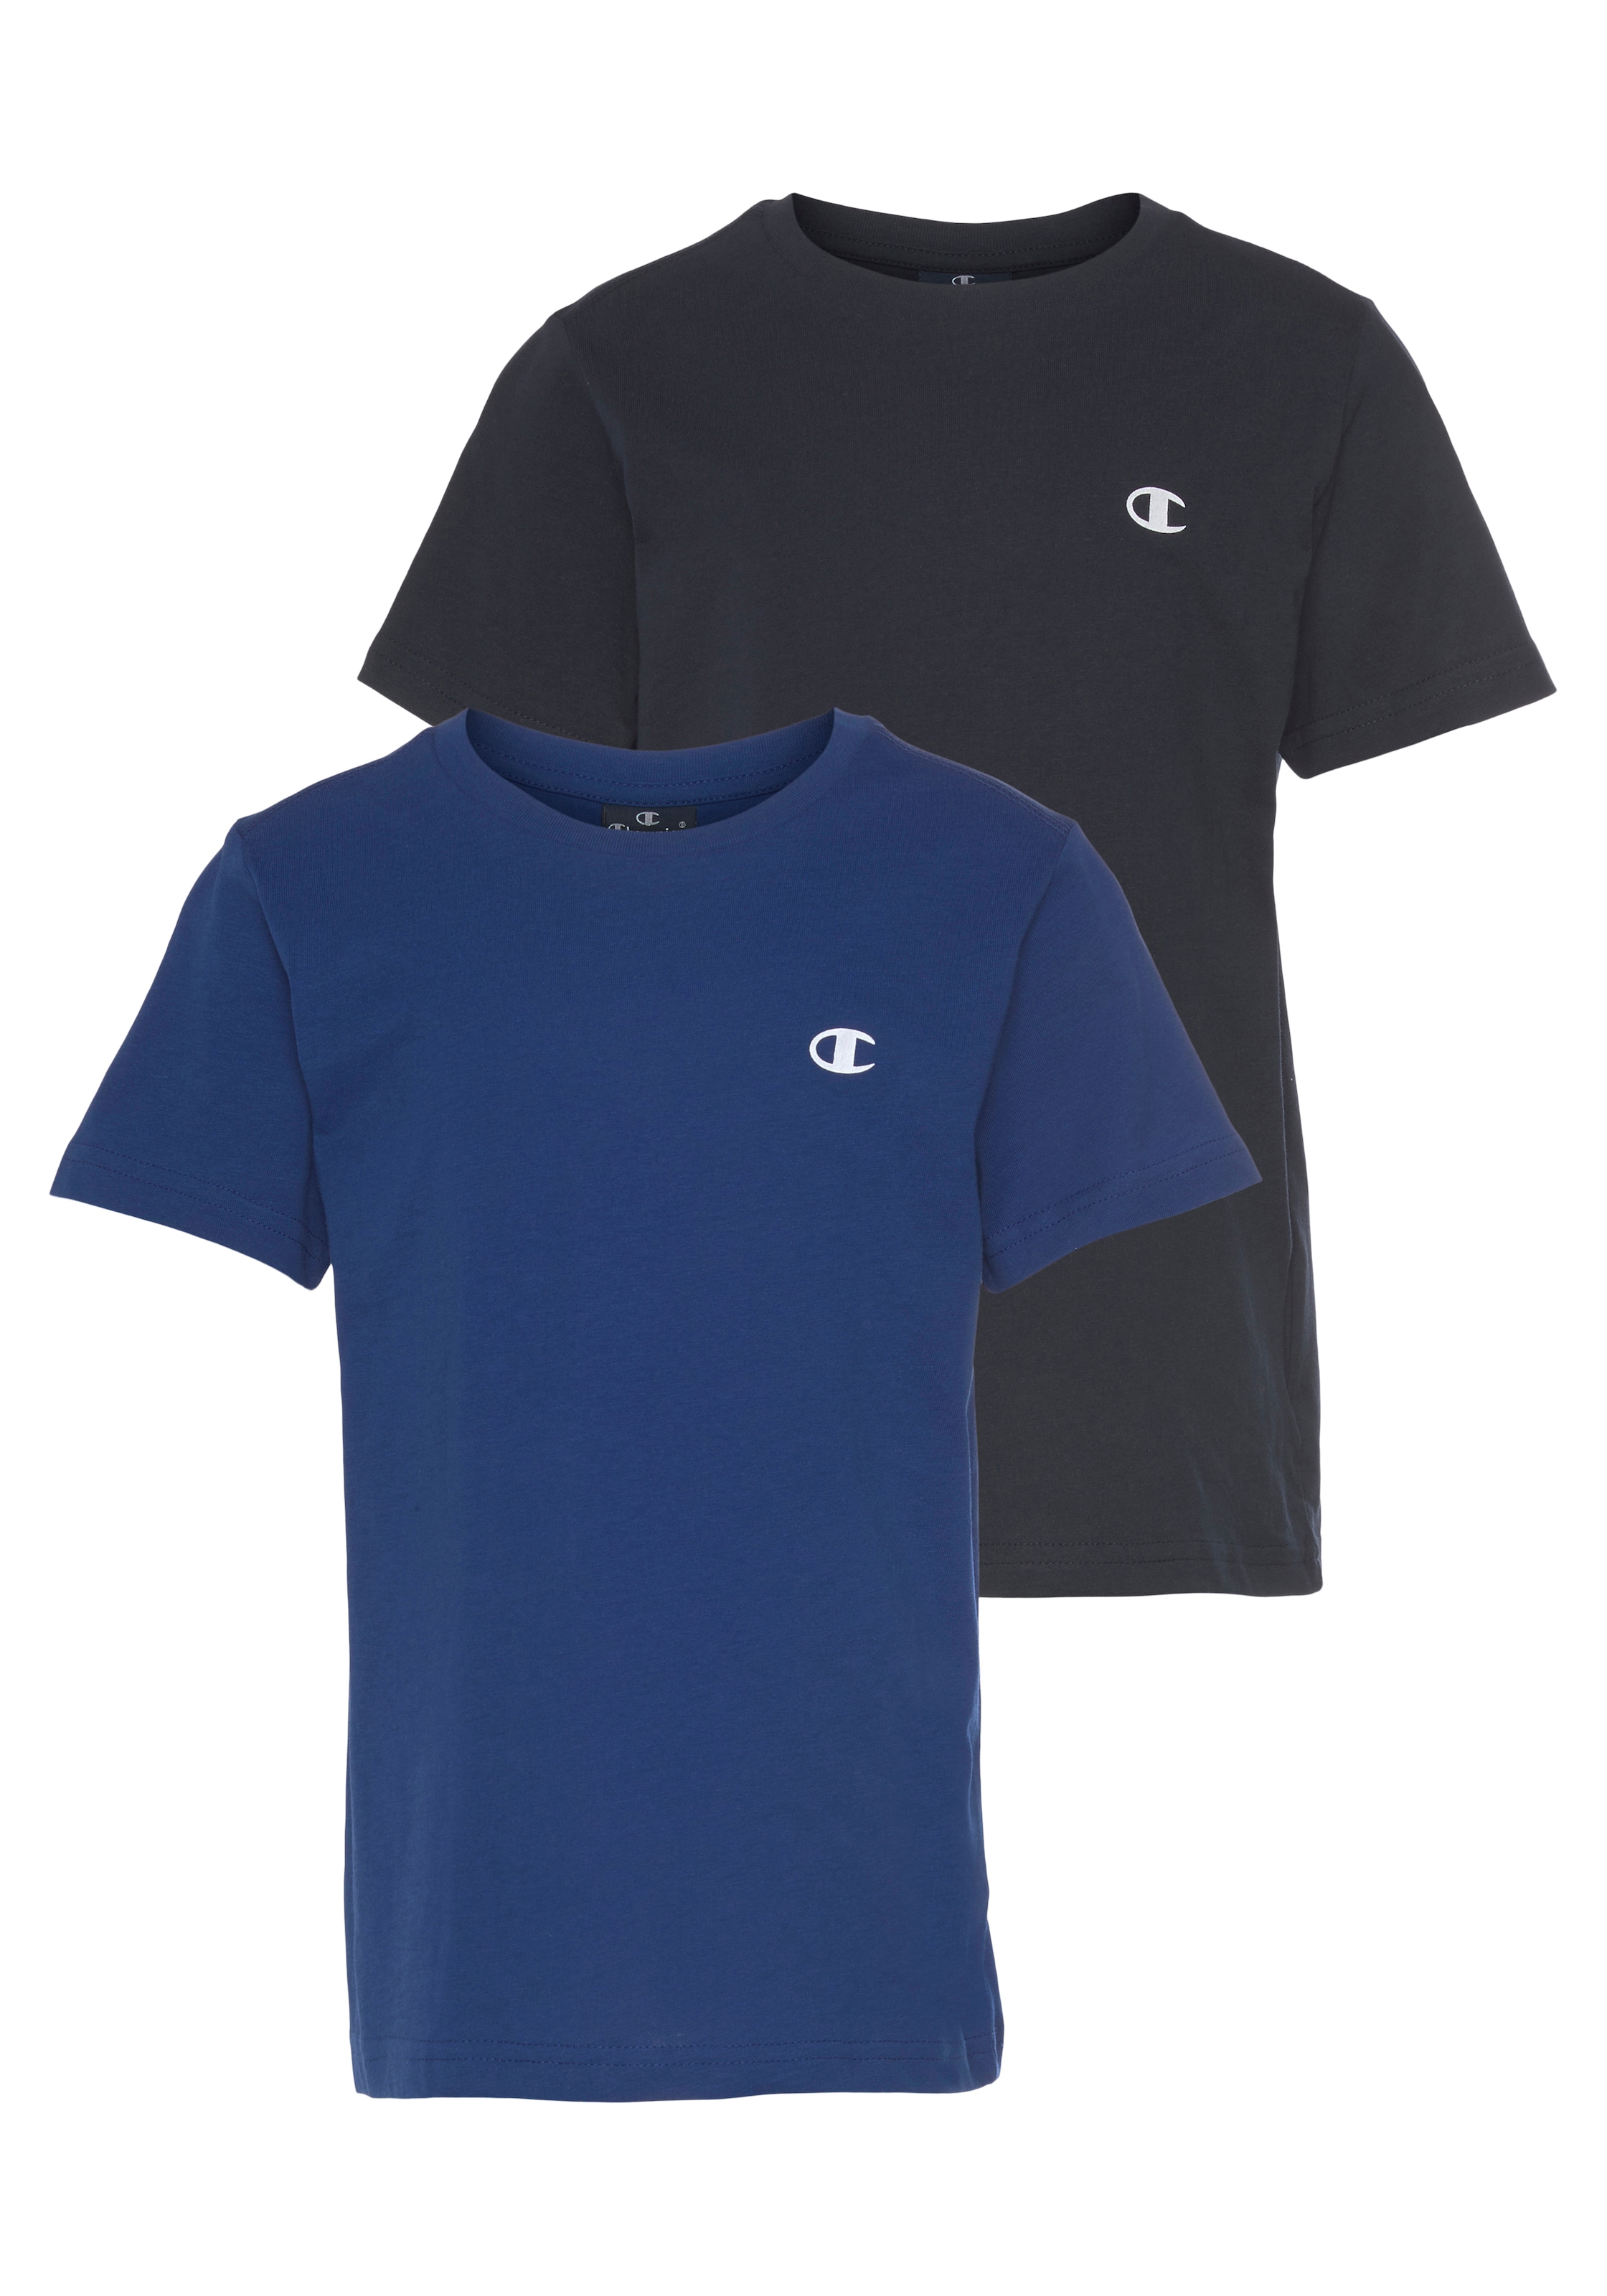 T-Shirt CREW Champion NECK«, OTTO (Packung, 2 »2-PCK tlg.) bei